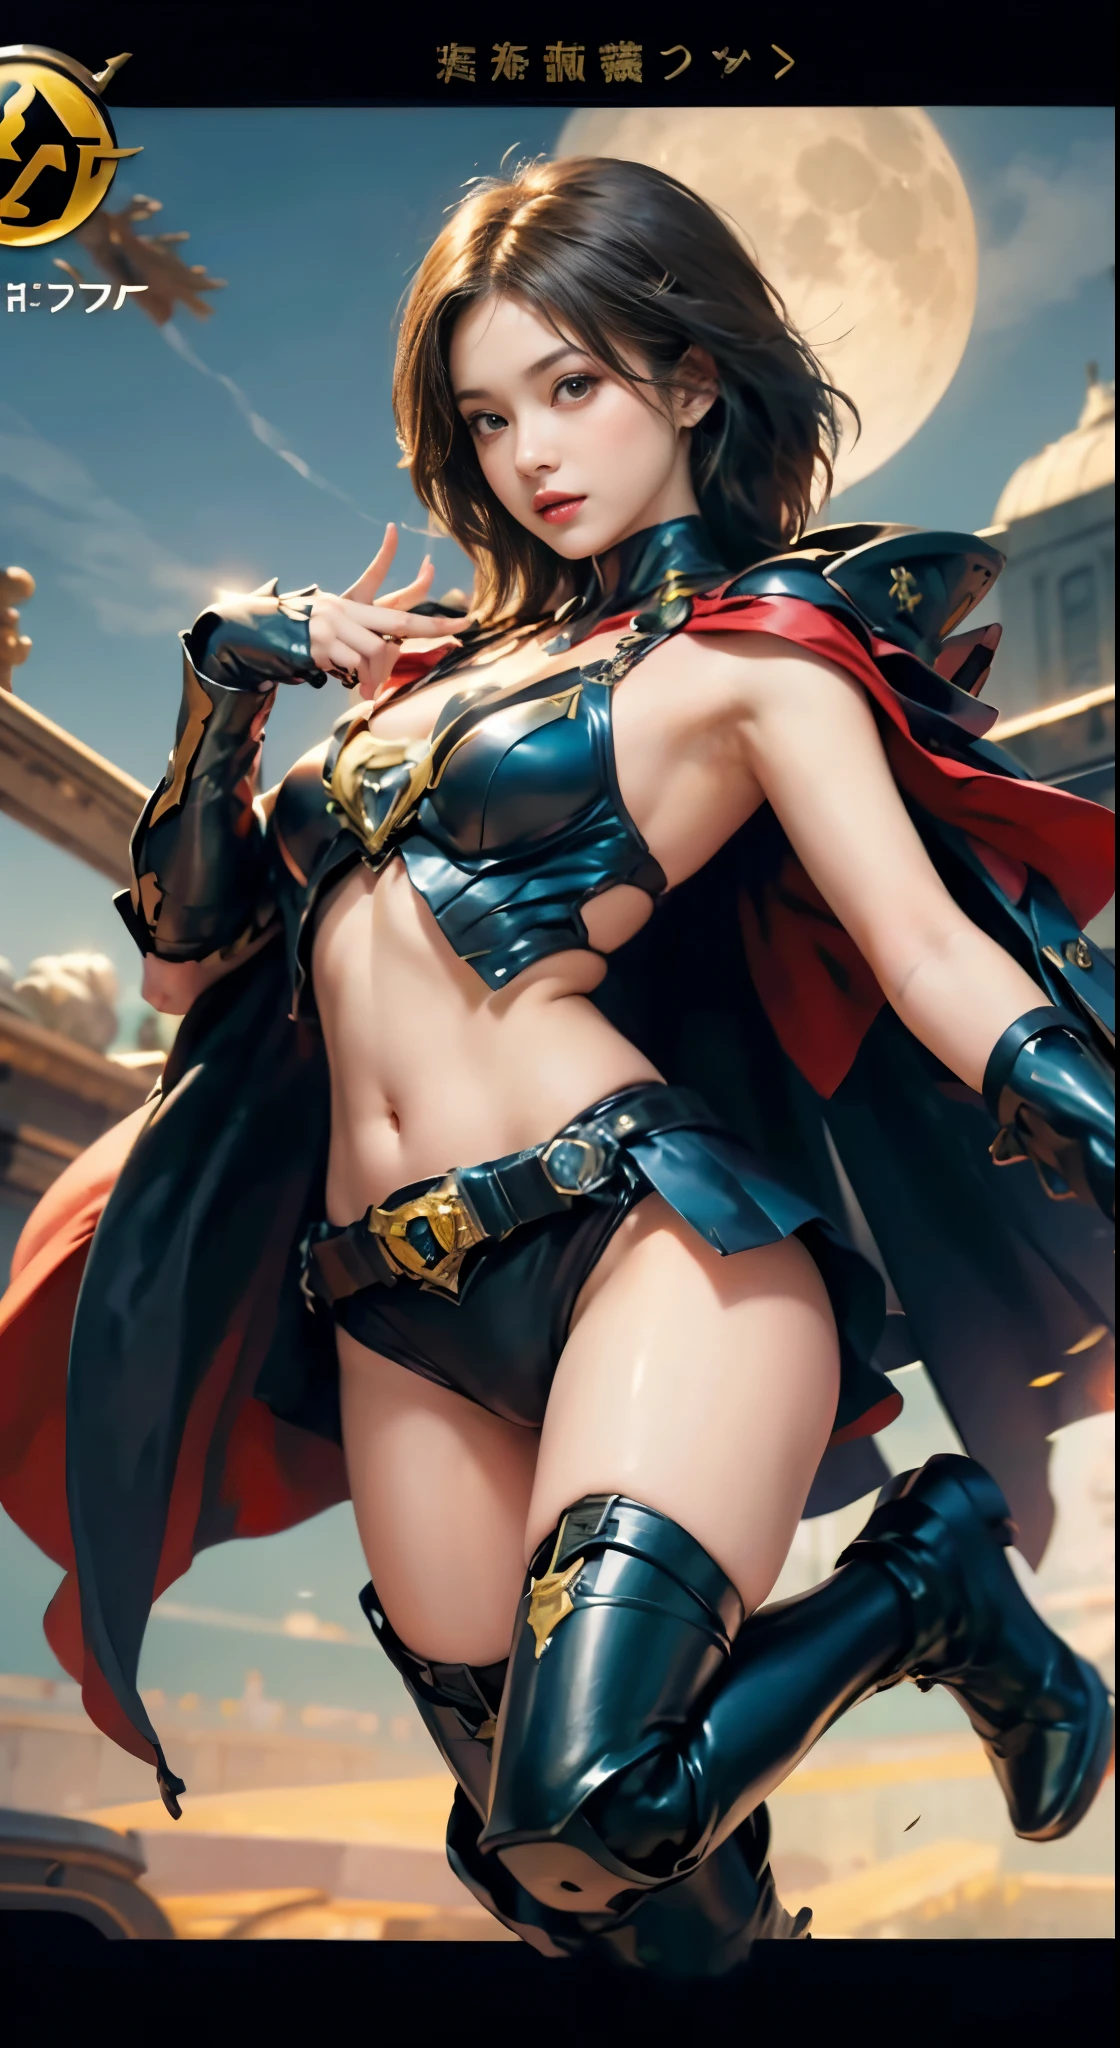 kamen rider、kamen rider Kiva、Female kamen rider、Sexy kamen rider、good at seducing、((The face is clearly visible))、Beautiful face、Fluttering cloak、s Armor、mecha-armored、cleavage of the breast、Navel Ejection、((Transformation Belt))、((small metal panties))、cameltoe、thighs thighs thighs thighs、shocker、((Big full moon in the background))、(Rider Kick)、(Jumping Kick)、(((trading card)))、